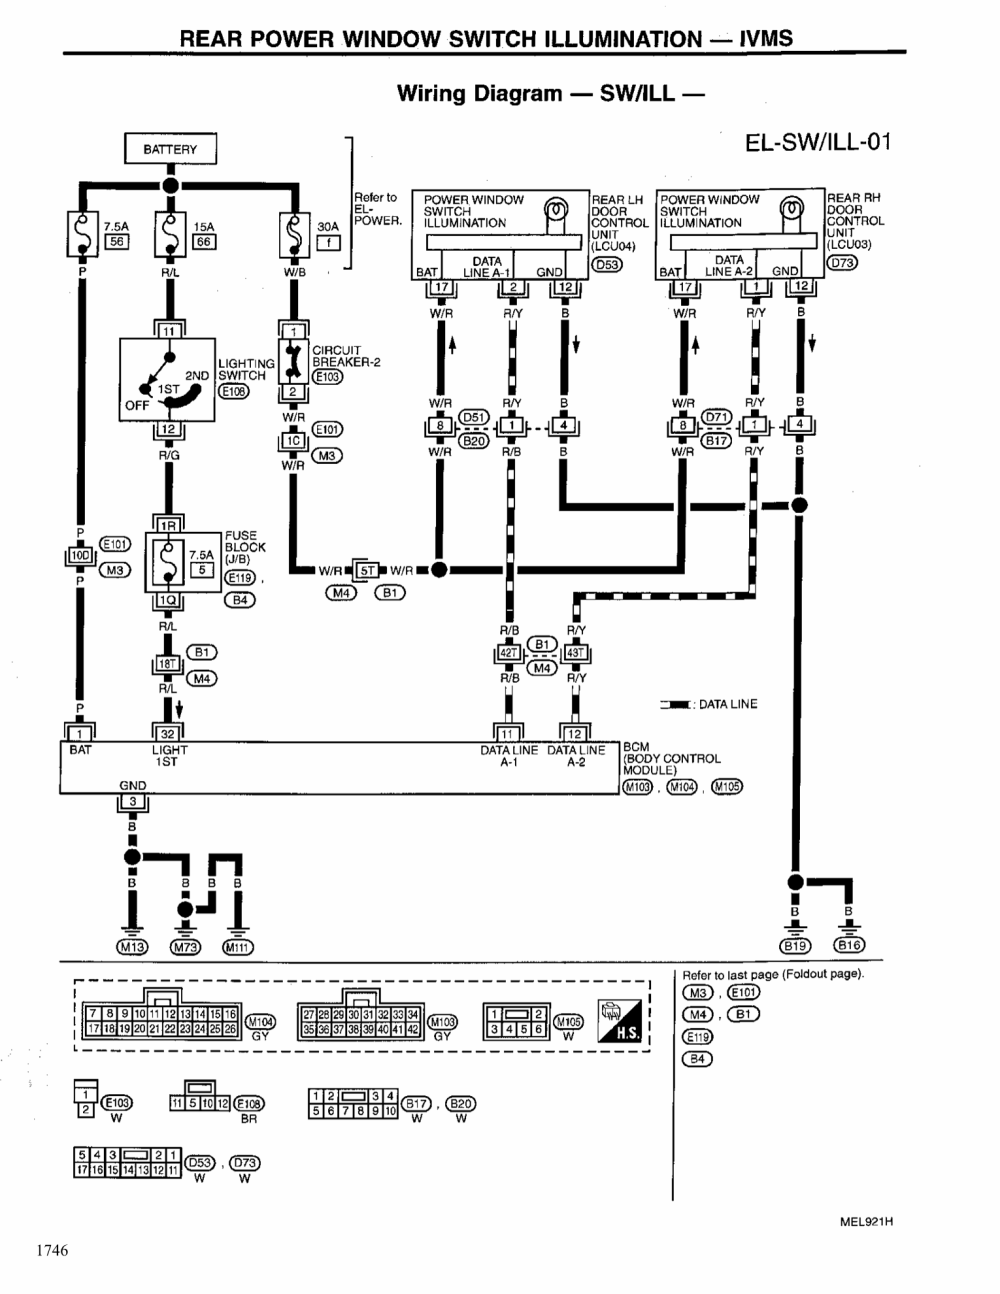 lscldc163p wiring diagram with power at switch